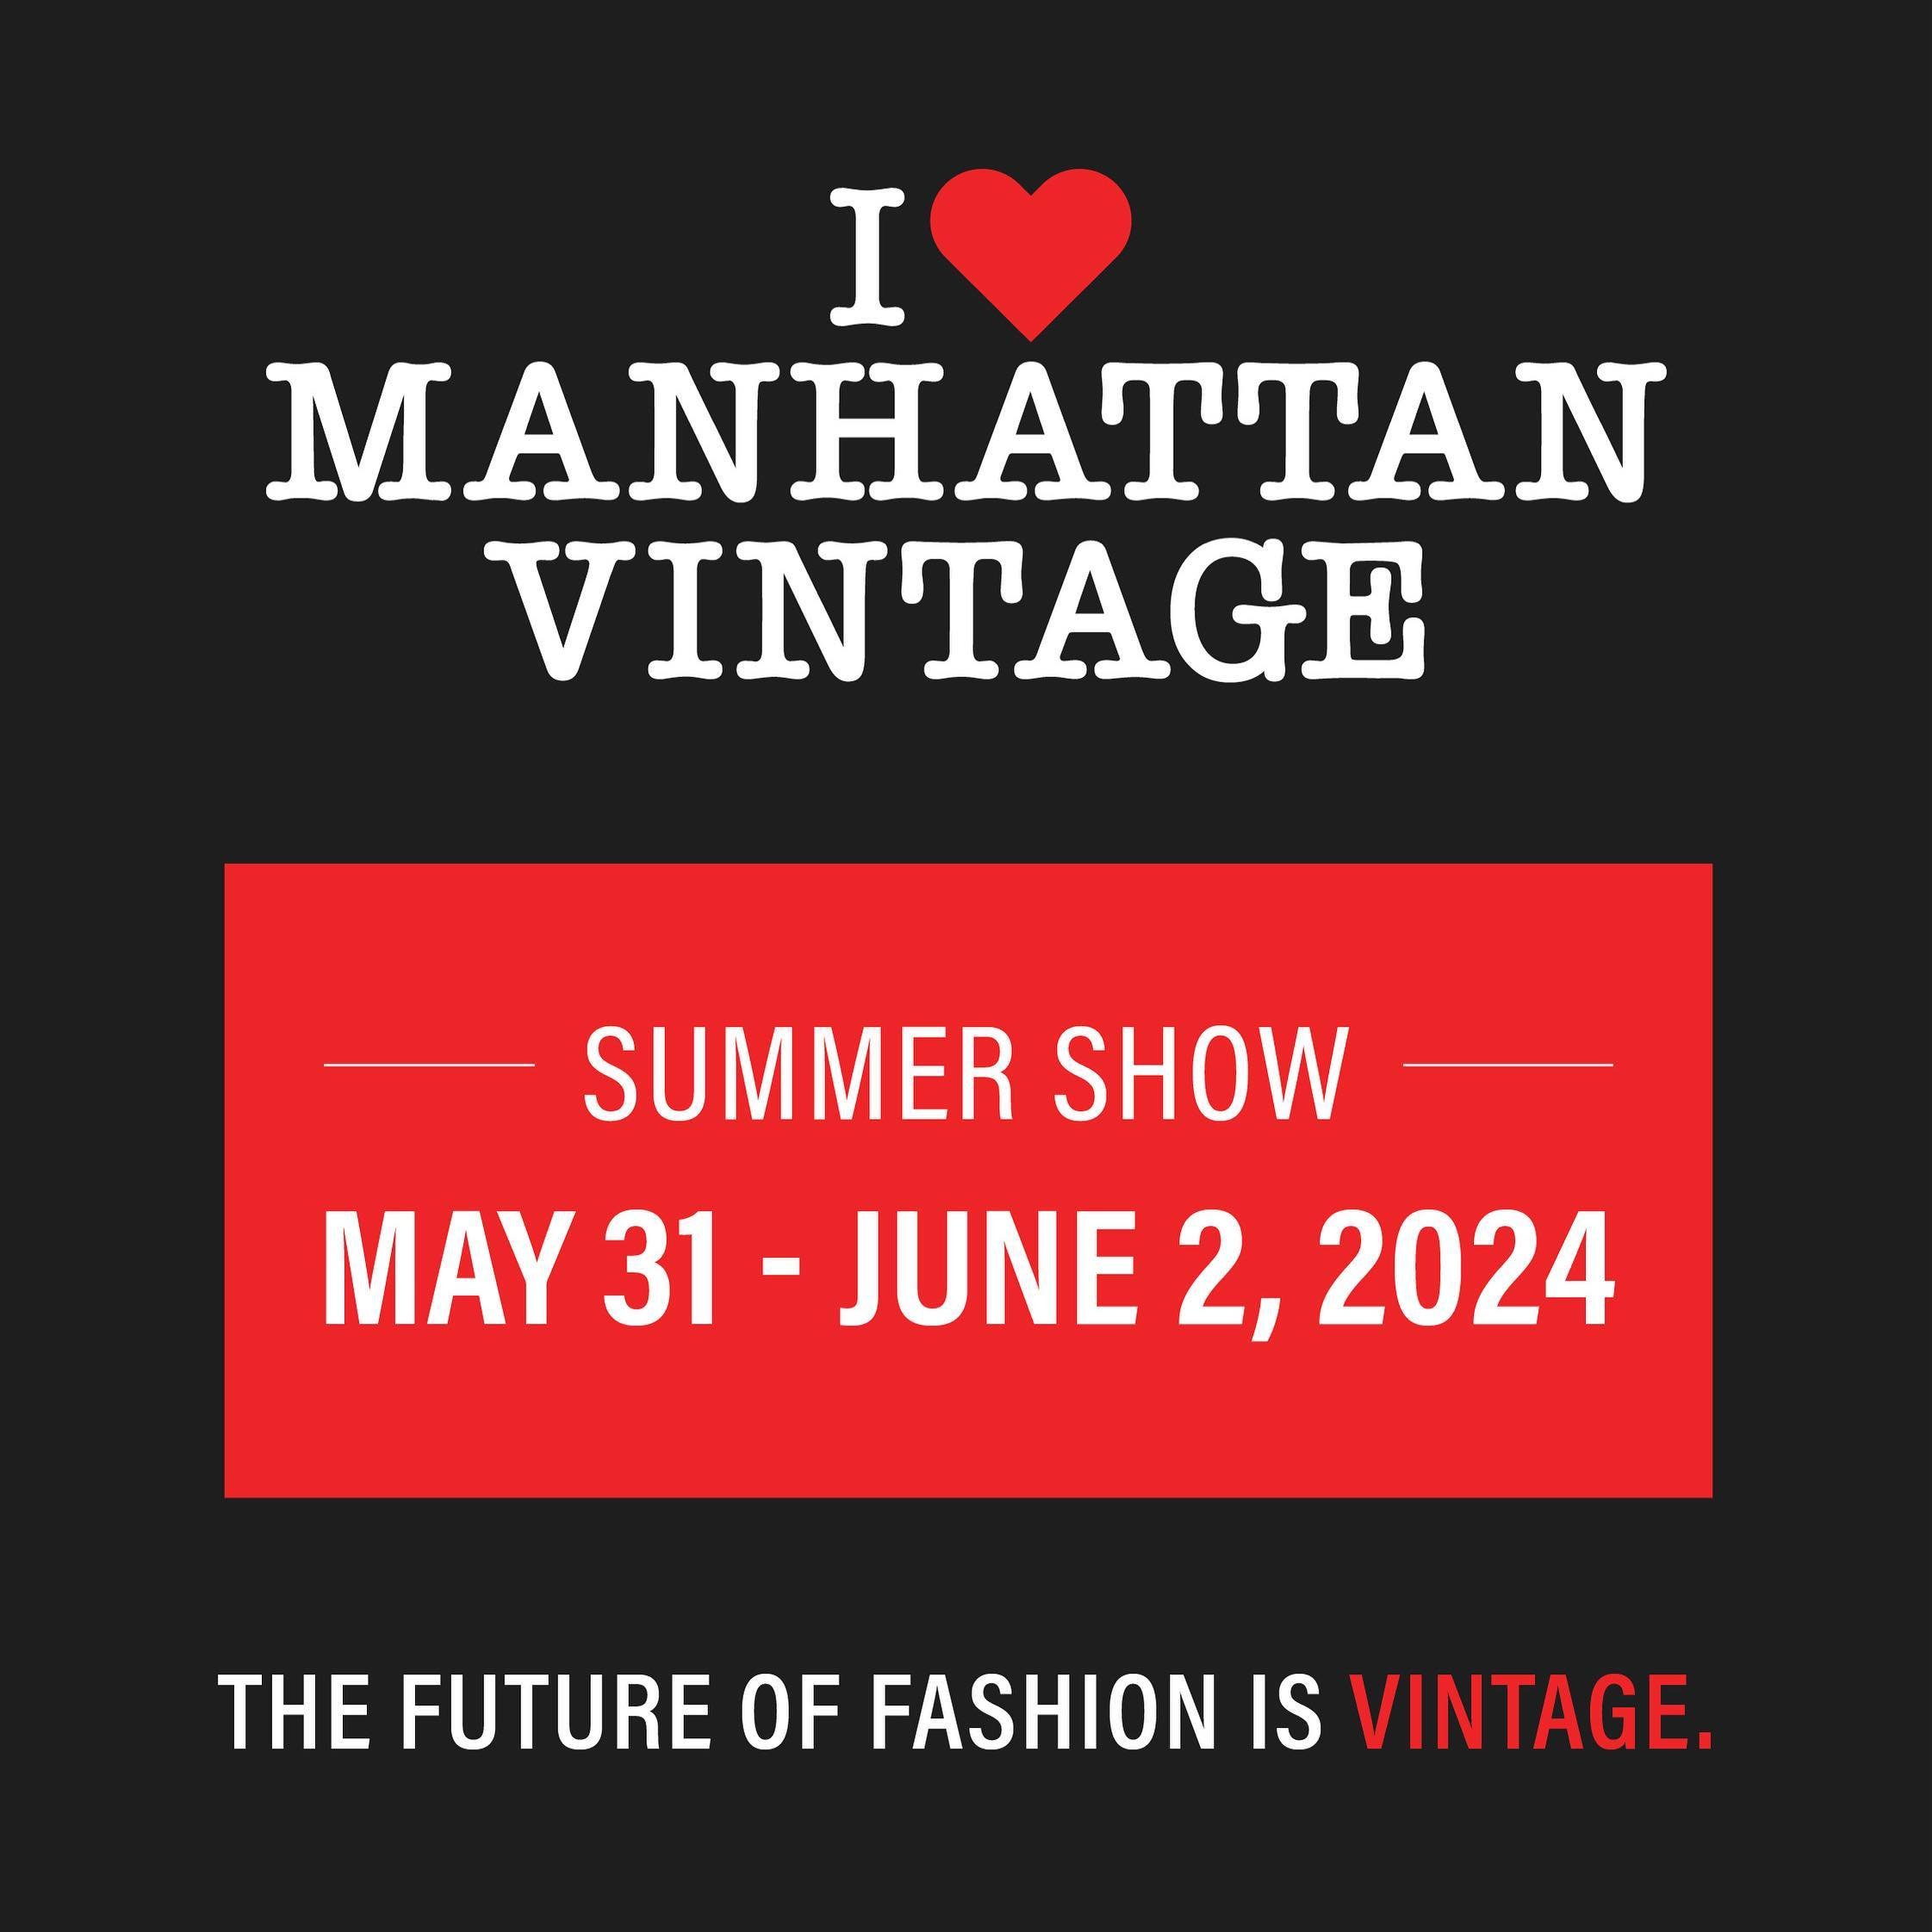 Get excited for our FIRST Summer show! Tickets are now live for May 31st, June 1st and June 2nd. See you there! ❤️

#vintageforall